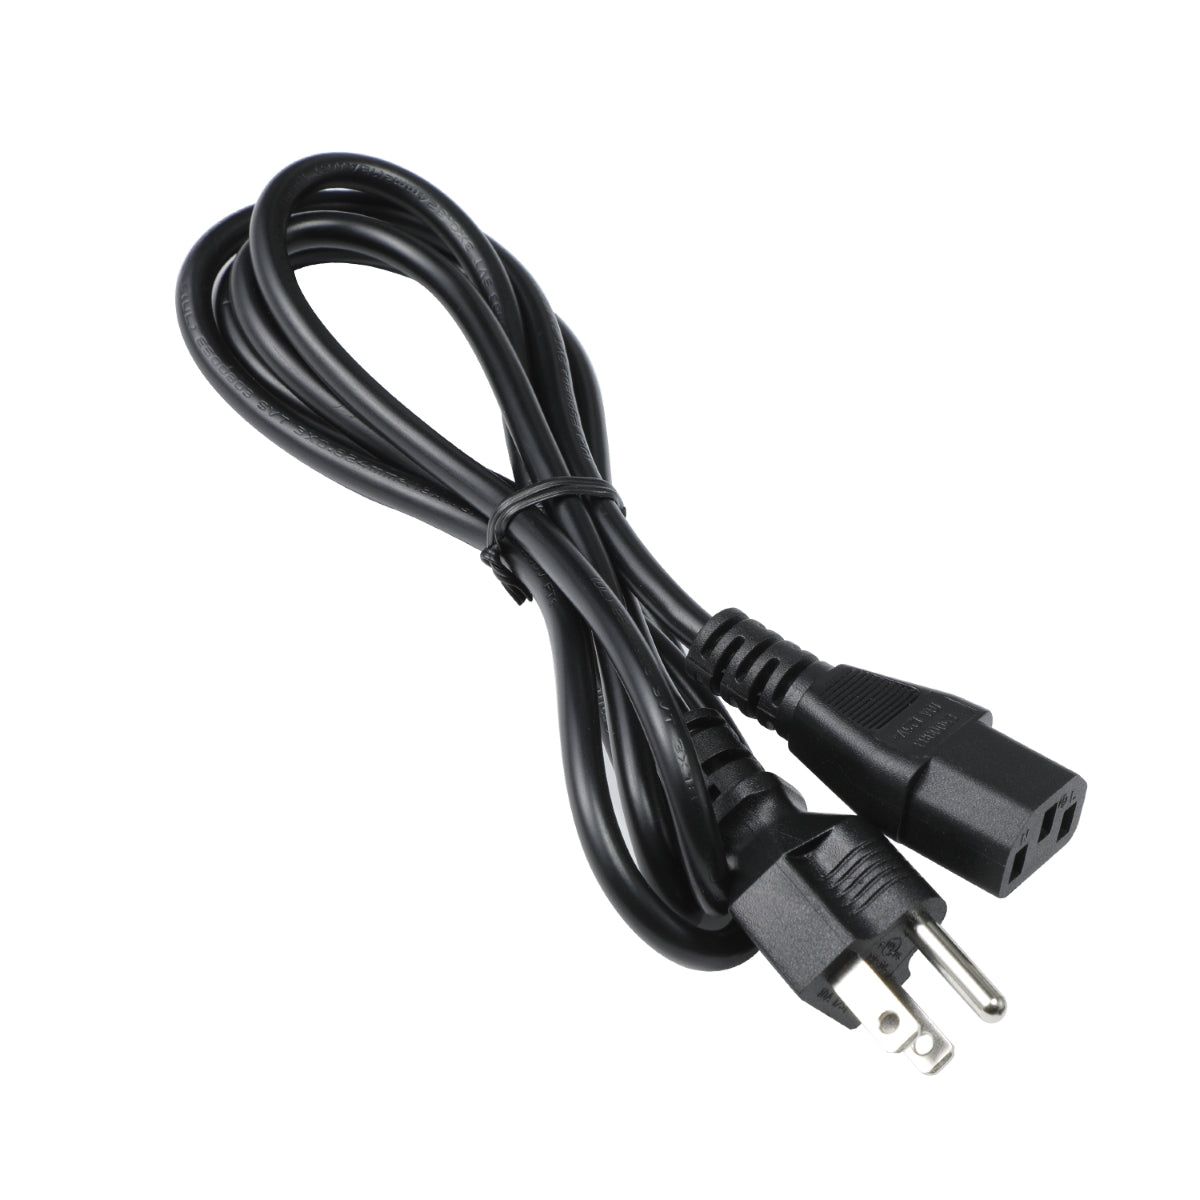 Power Cord for Acer XF250Q Monitor.